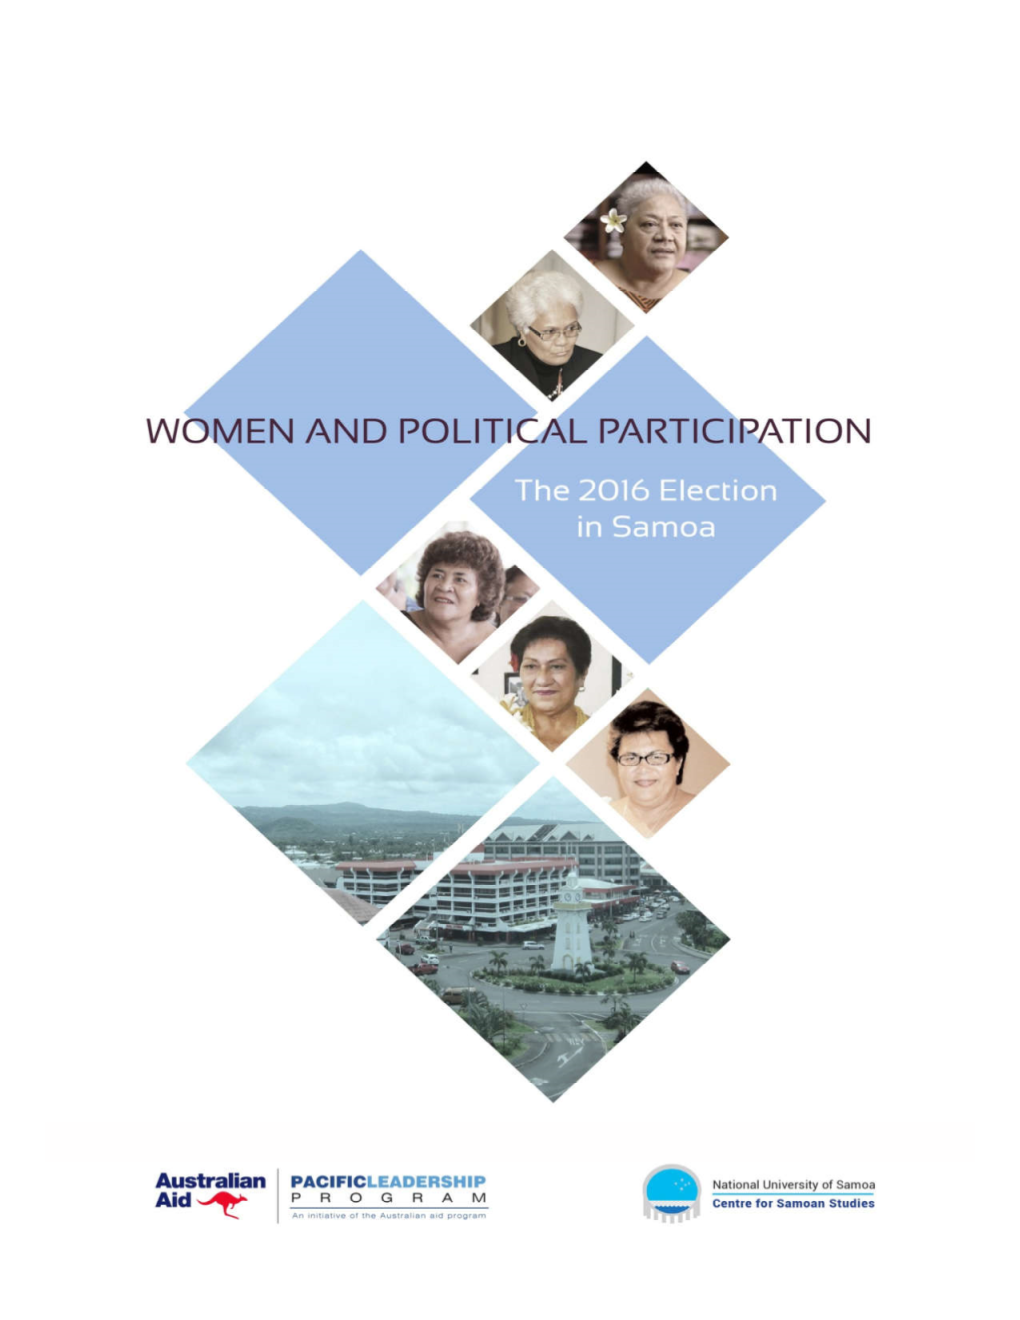 Women and Political Participation: the 2016 Election in Samoa